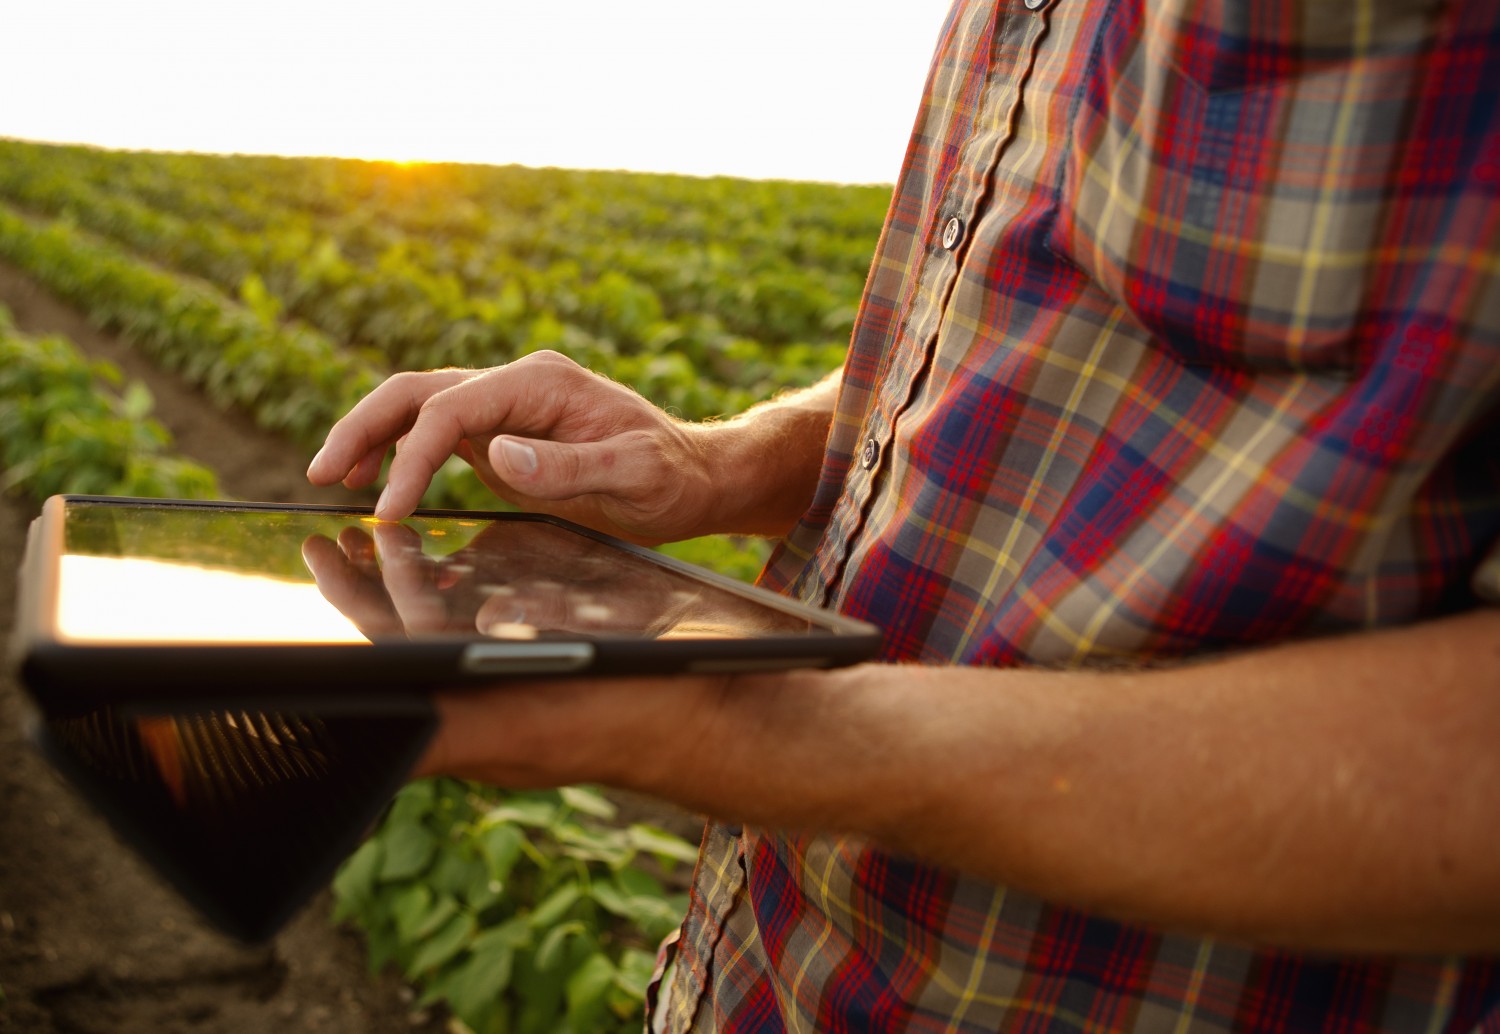 How the internet of things will change the farming industry